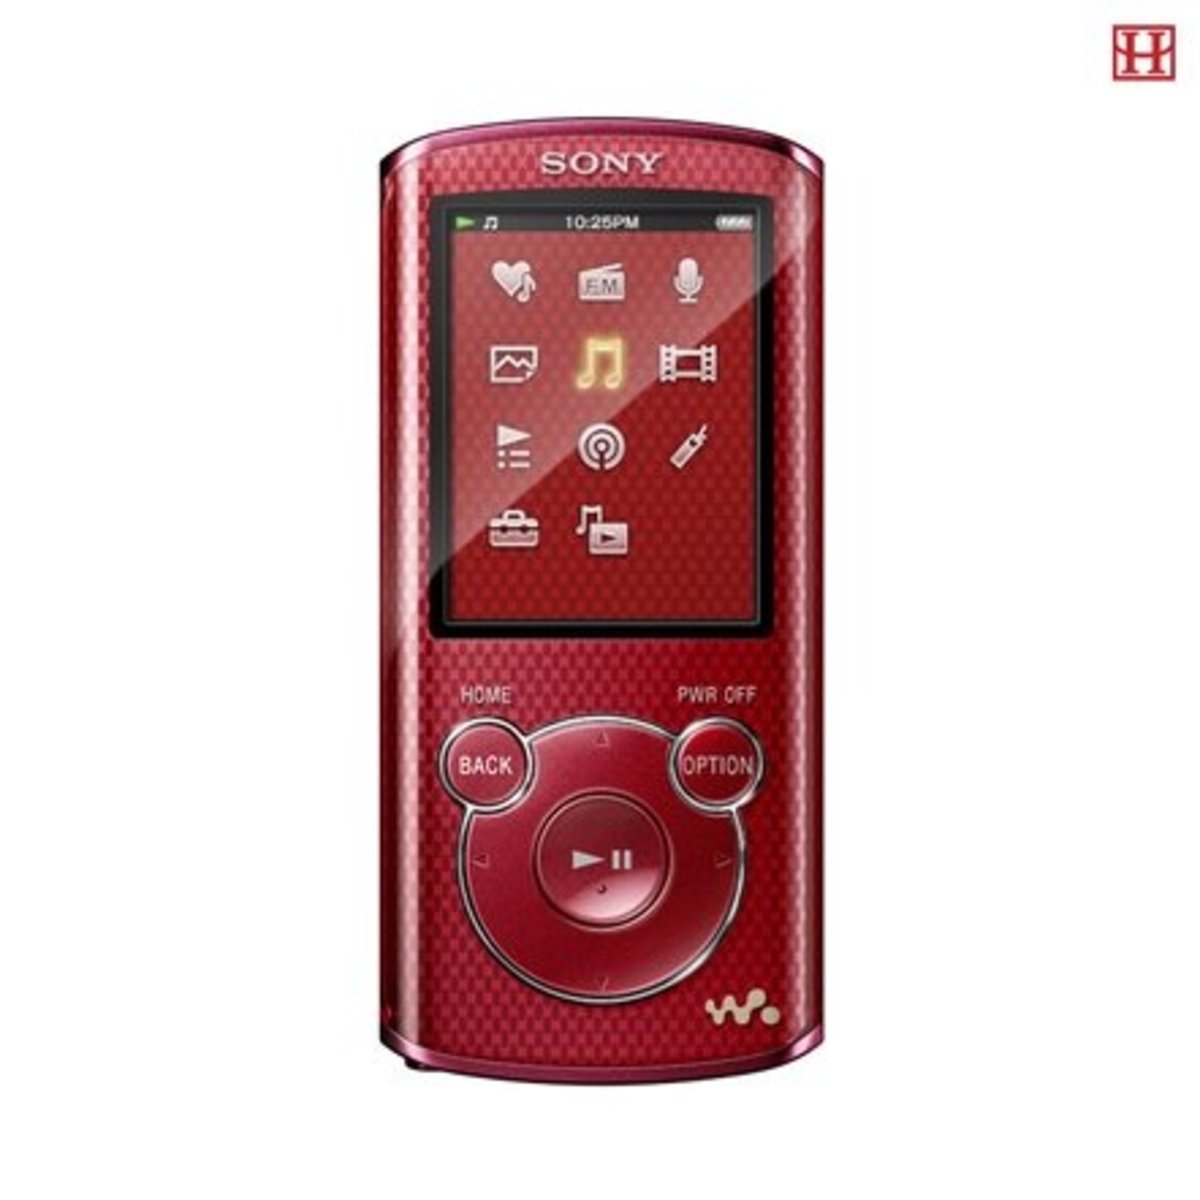 Sony walkman mp3 player software download for mac